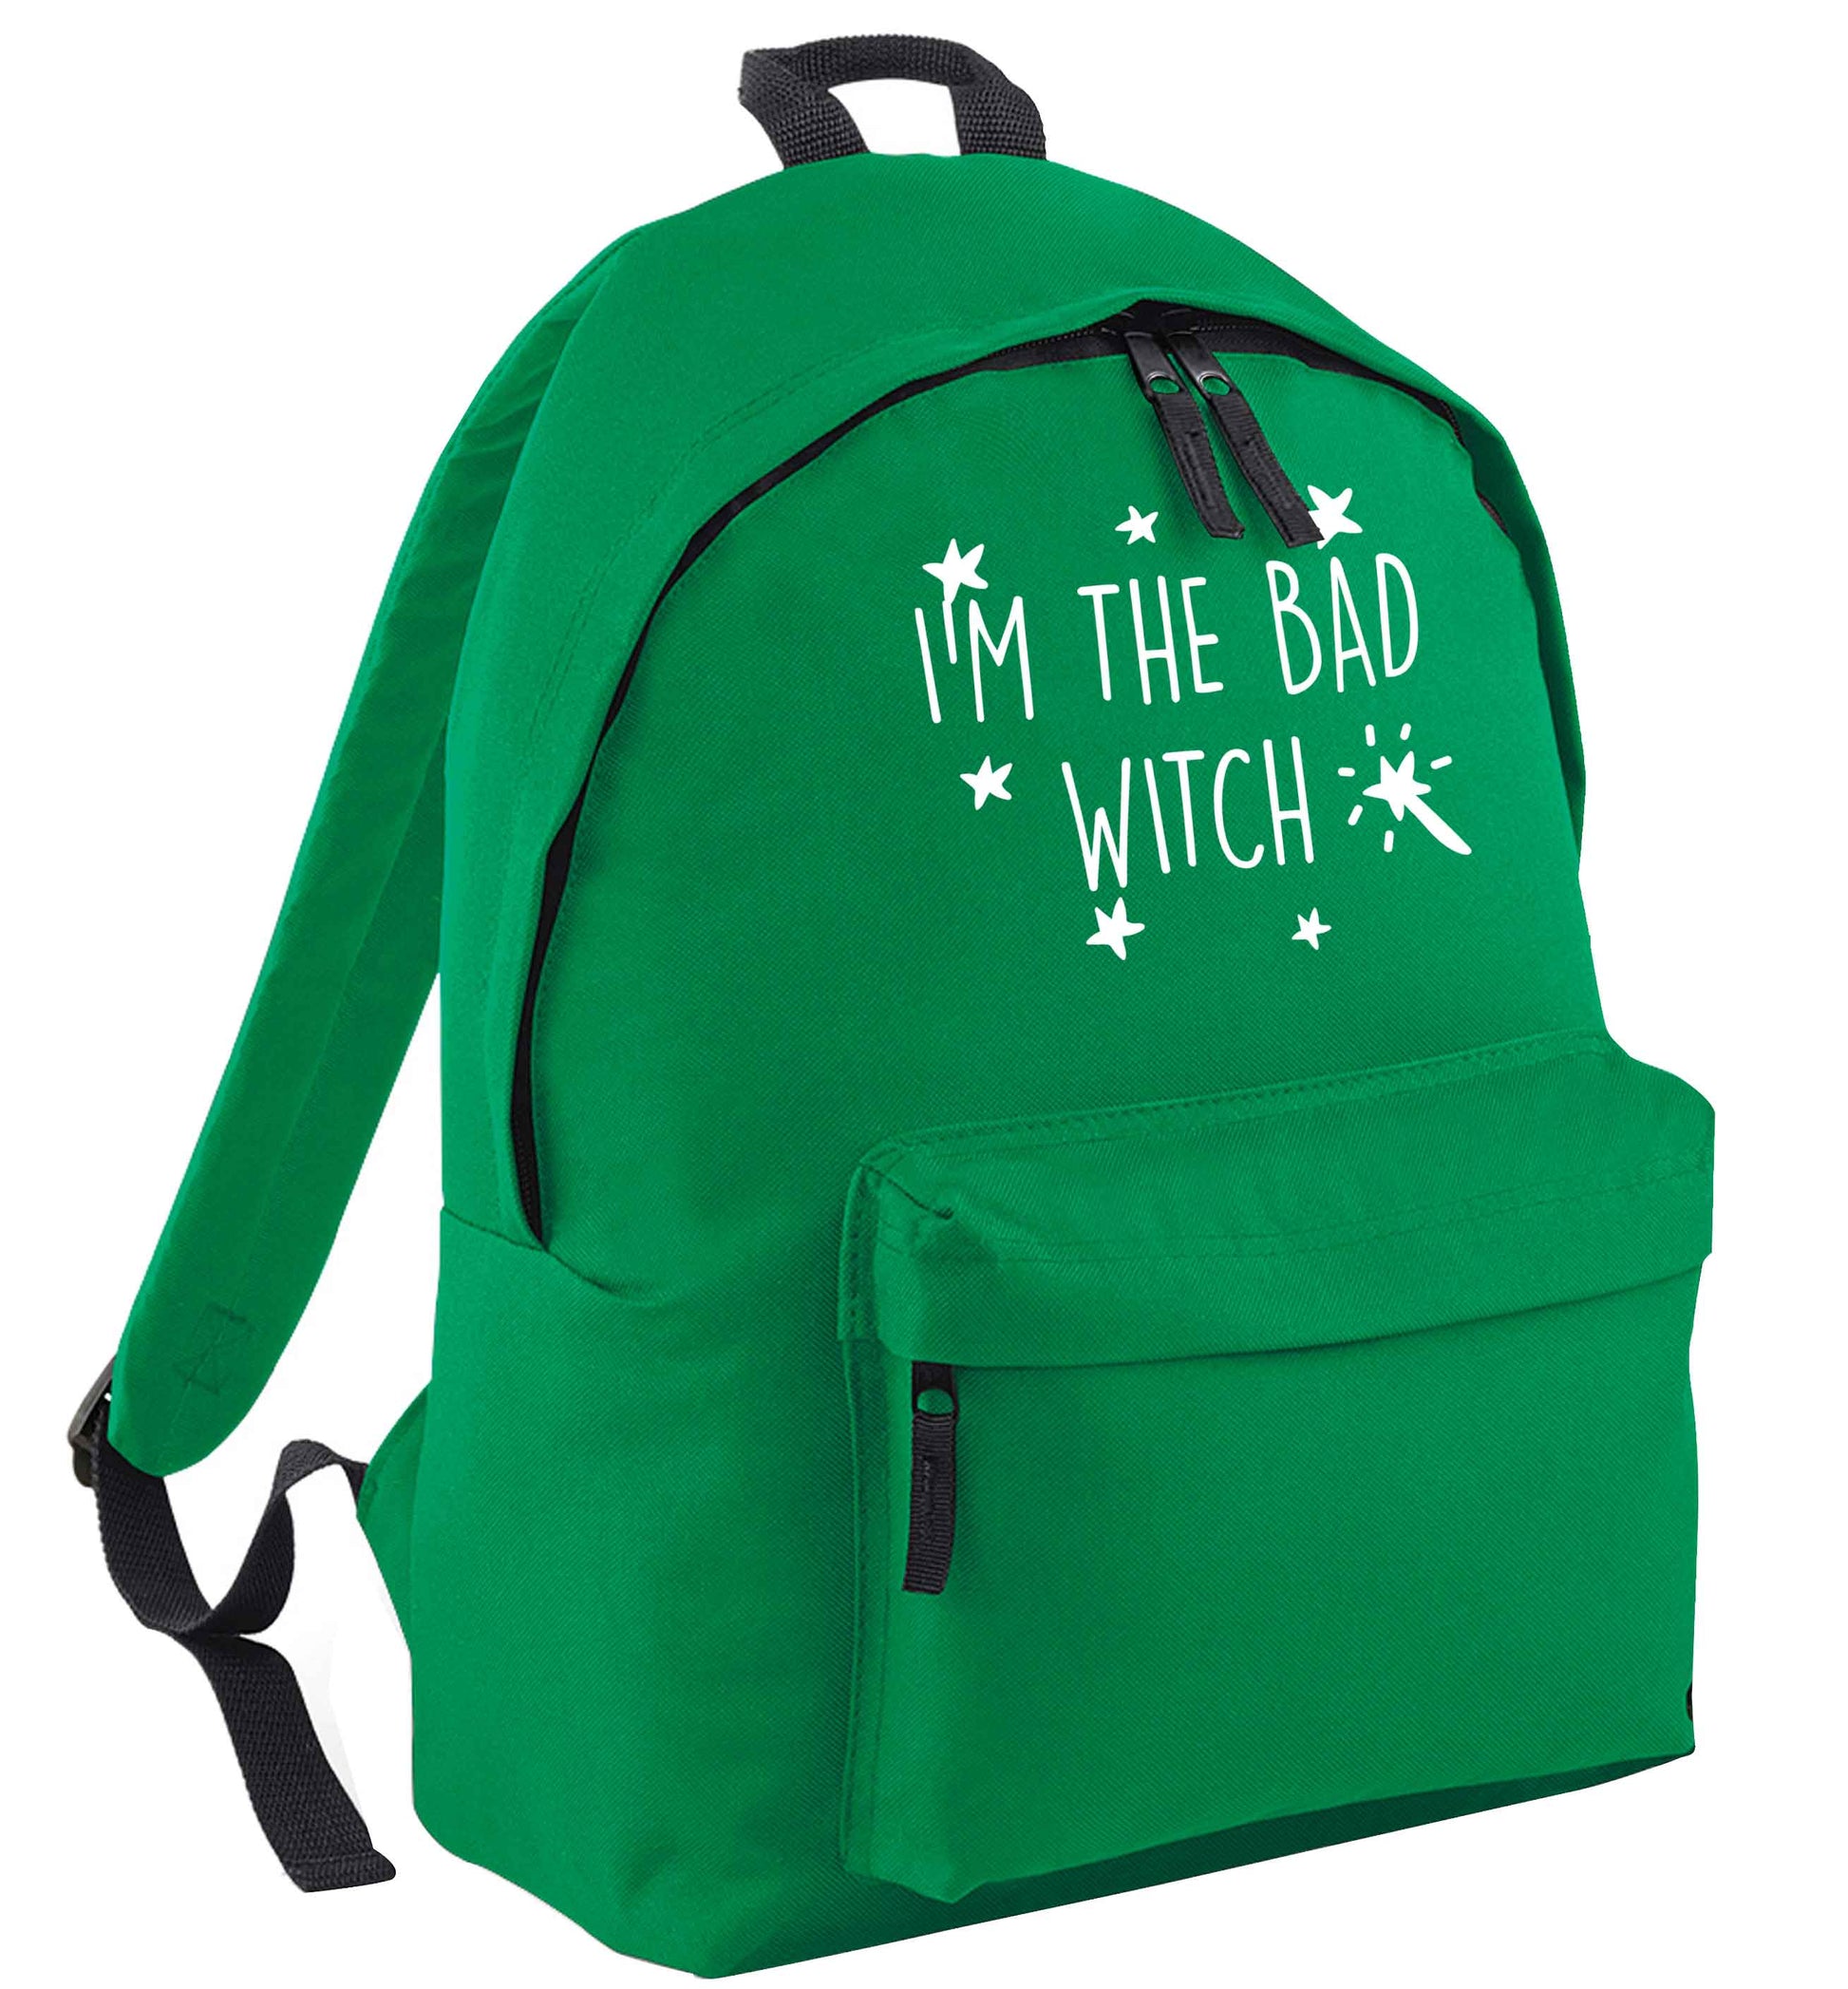 Bad witch green adults backpack